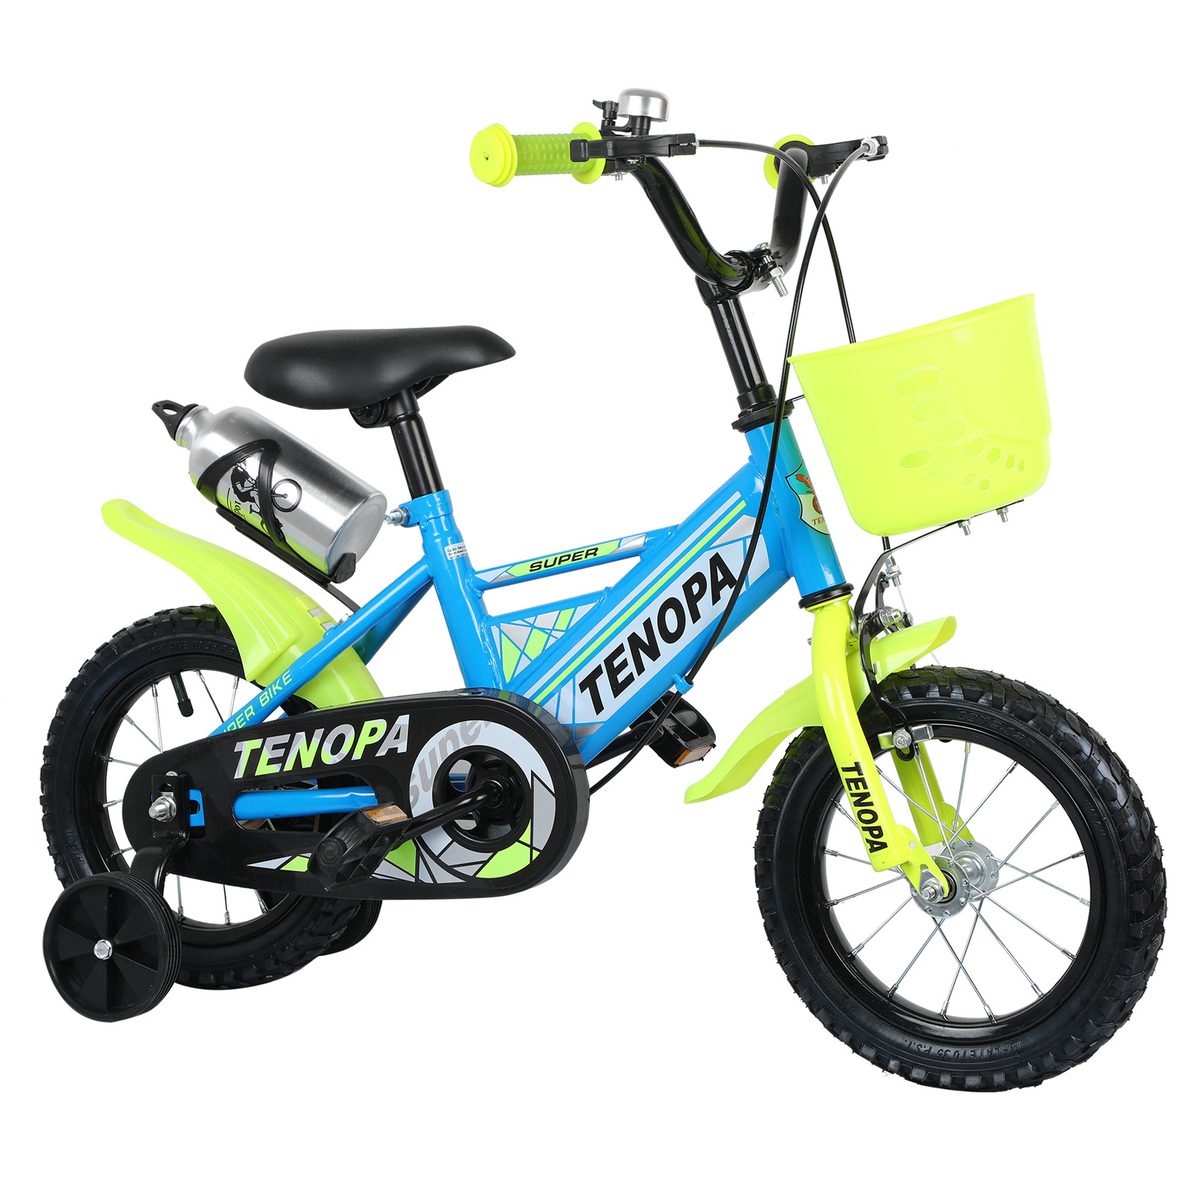 Tenopa Bicycle YSP1001 12 12" Assorted colors